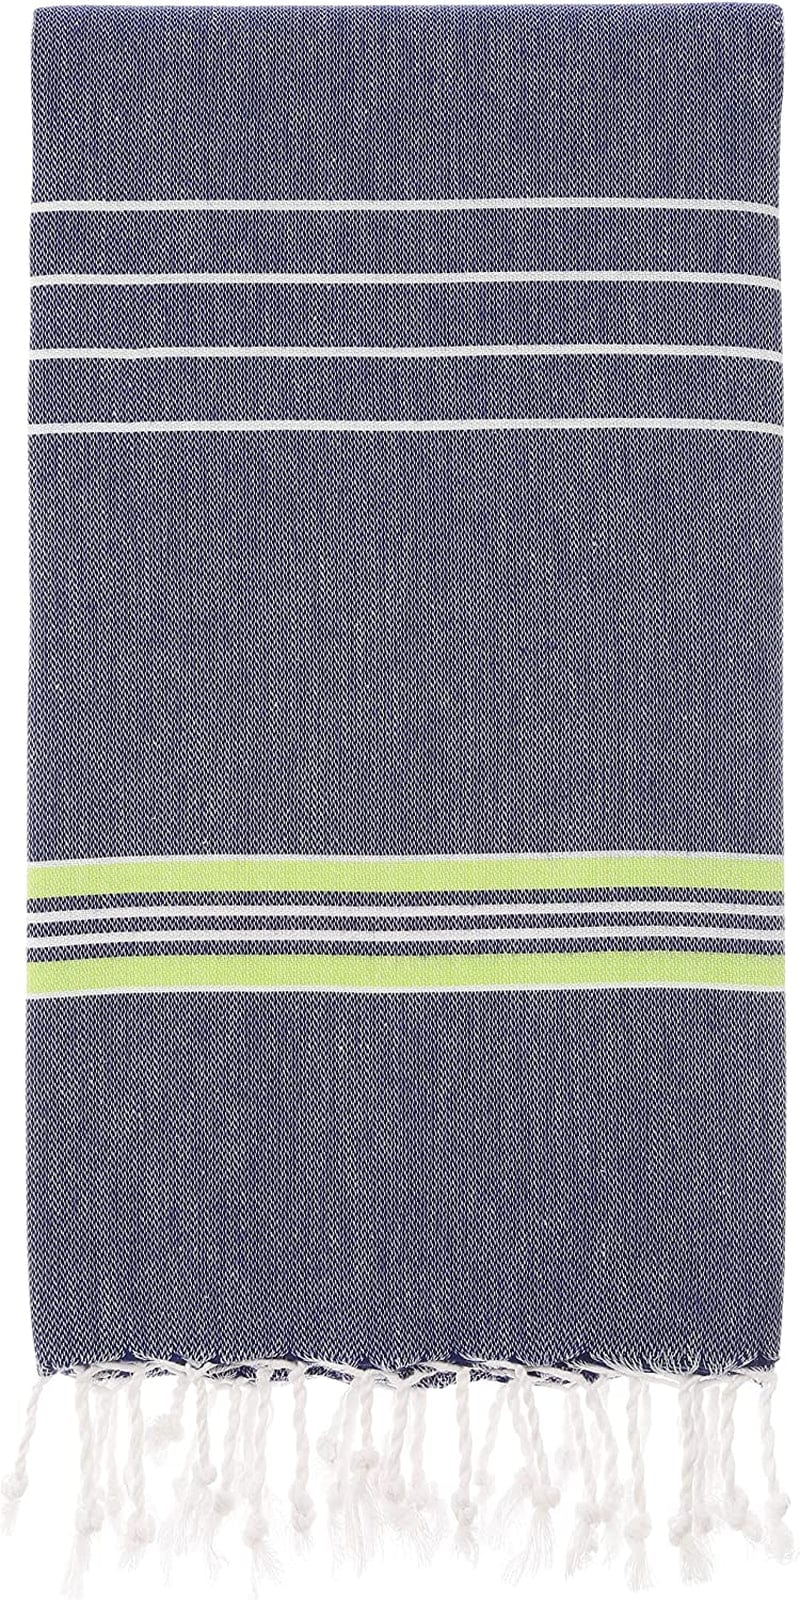 Cacala Turkish Beach Towels Quick Dry Prewashed for Soft Feel Extra Large Blanket Peshtemal for Bathroom, Travel, Pool, Swim, Yoga, Face, Hair and Gym Paradise, 37 in X 70 In, Aqua Home & Garden > Linens & Bedding > Towels Cacala Dark Blue Pistachio 37 in x 70 in 